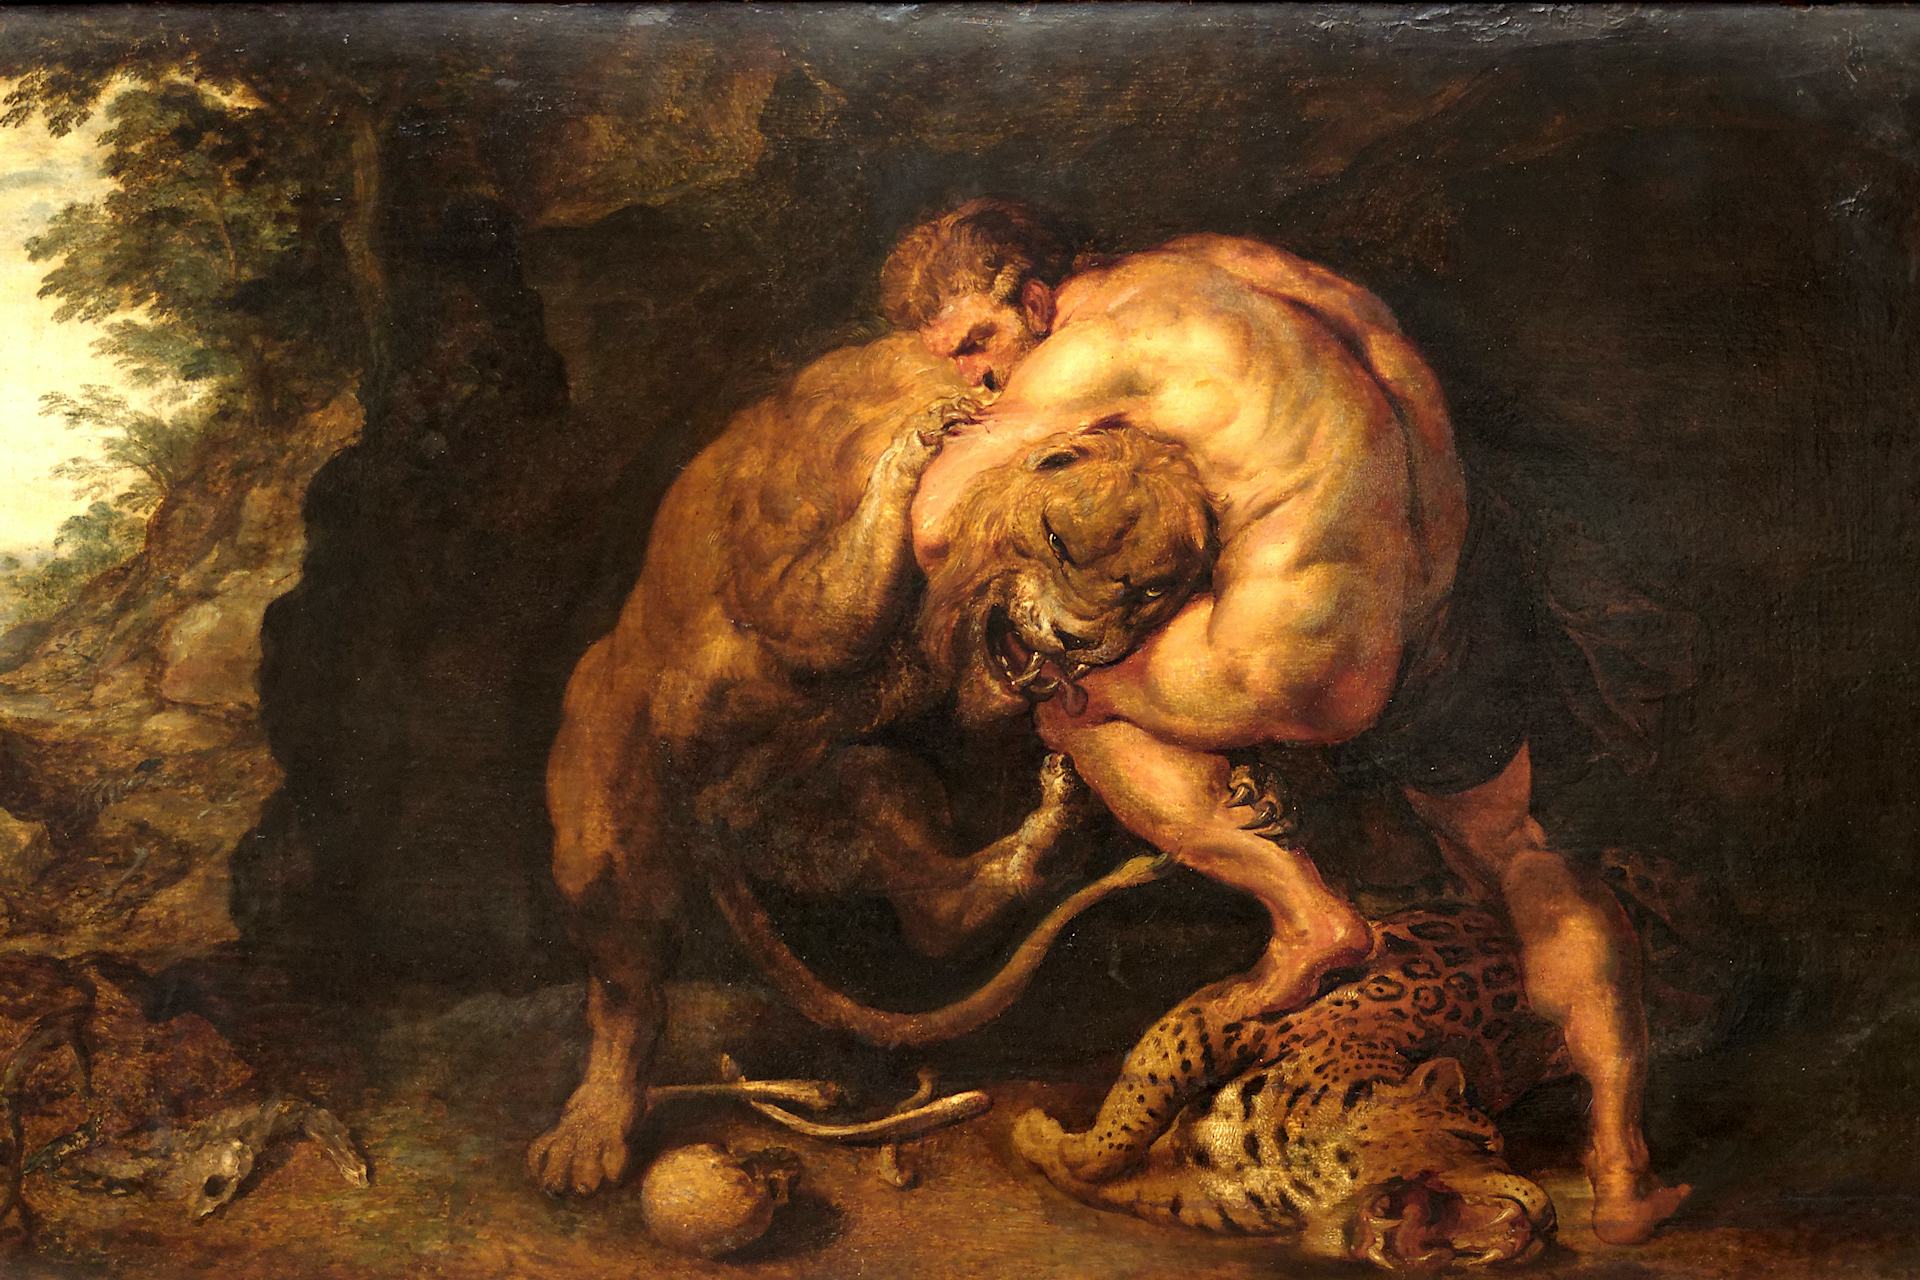 Hercules and the Nemean lion by Peter Paul Rubens (ca. 1615)